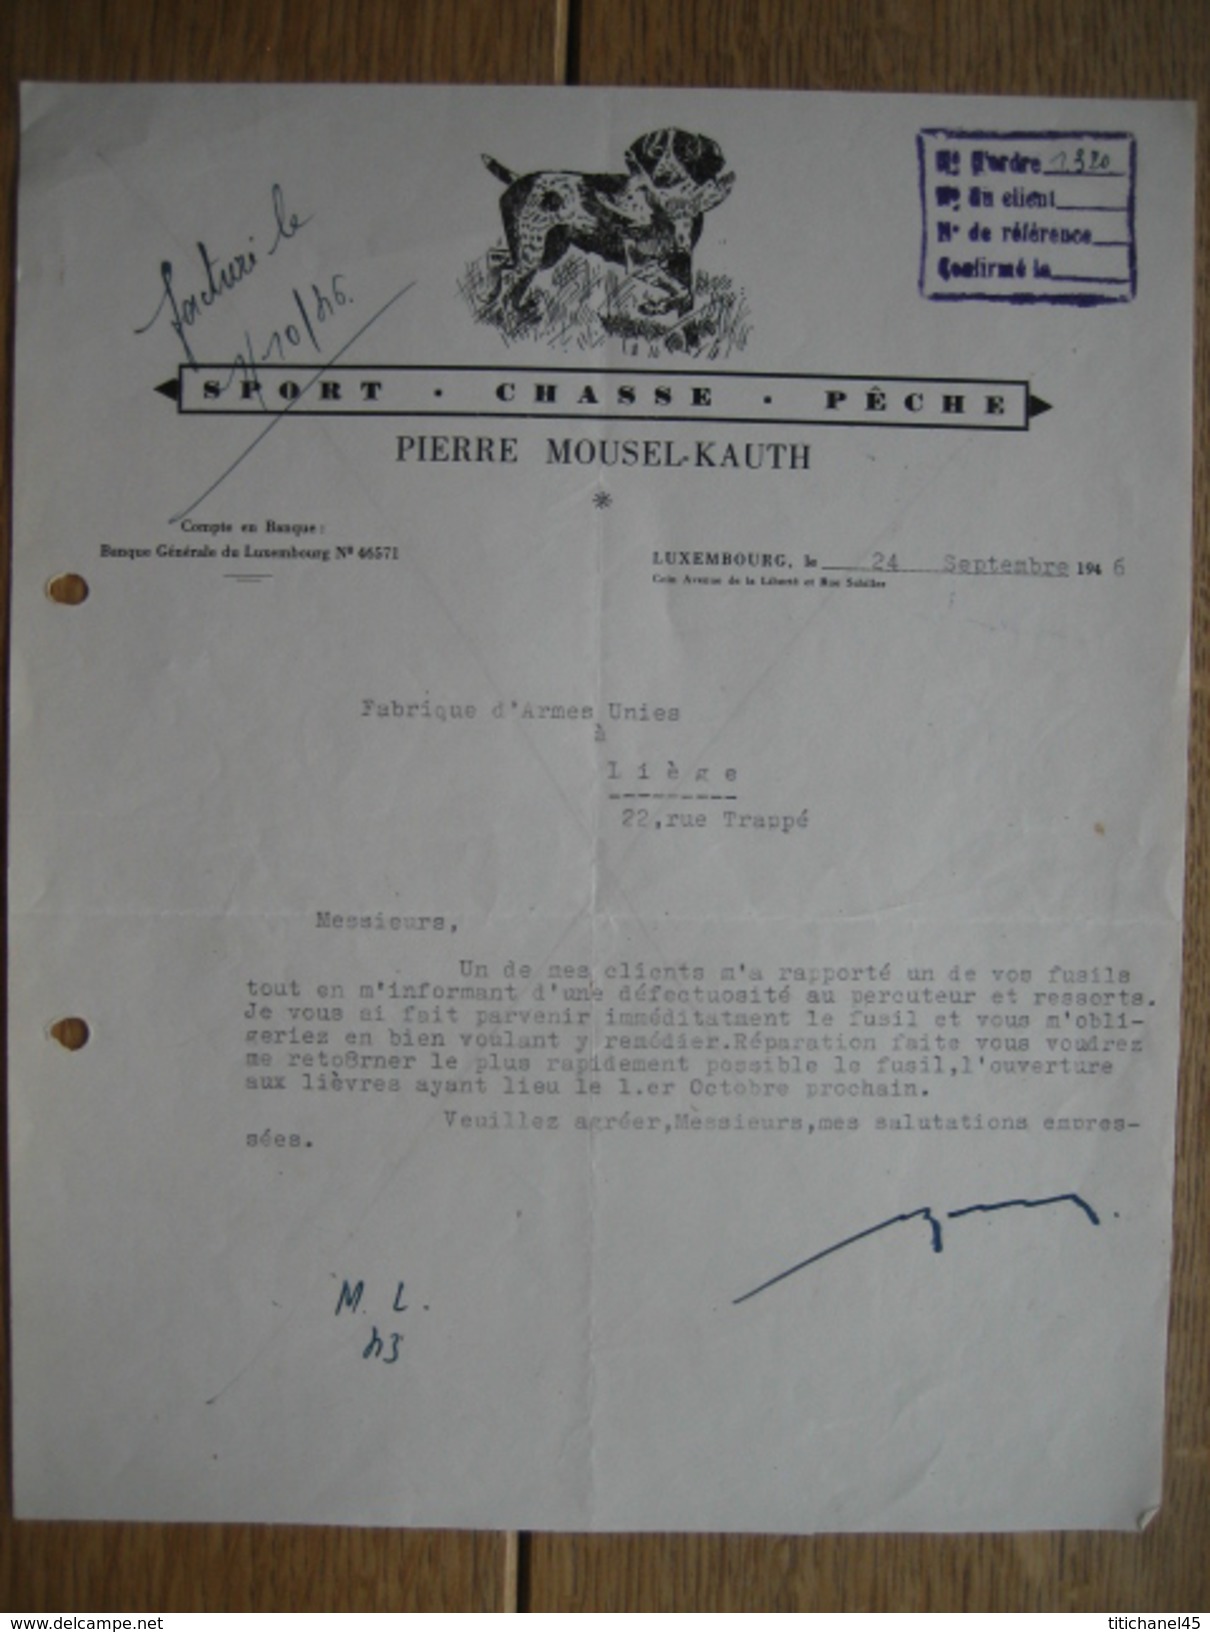 LUXEMBOURG 1946 - PIERRE MOUSEL-KAUTH - Sport - Chasse - Pêche - Luxemburg